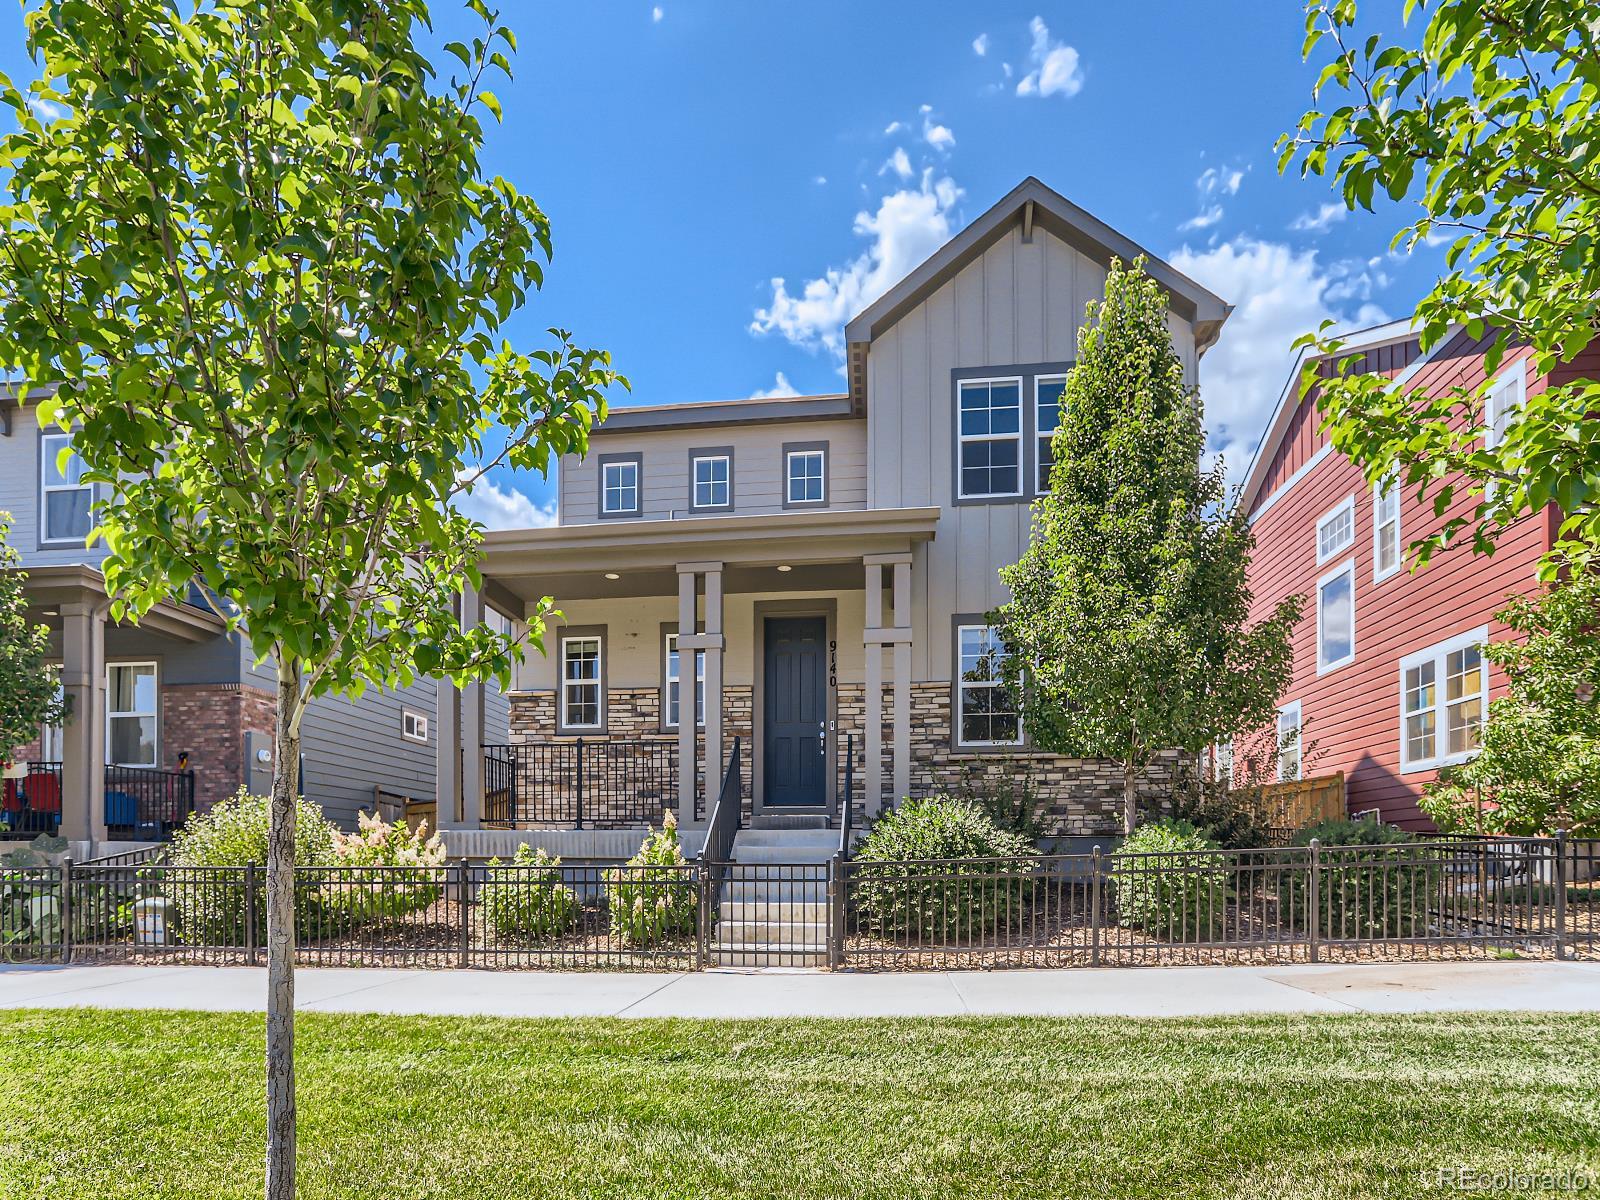 CMA Image for 9155 w 102nd place,Westminster, Colorado